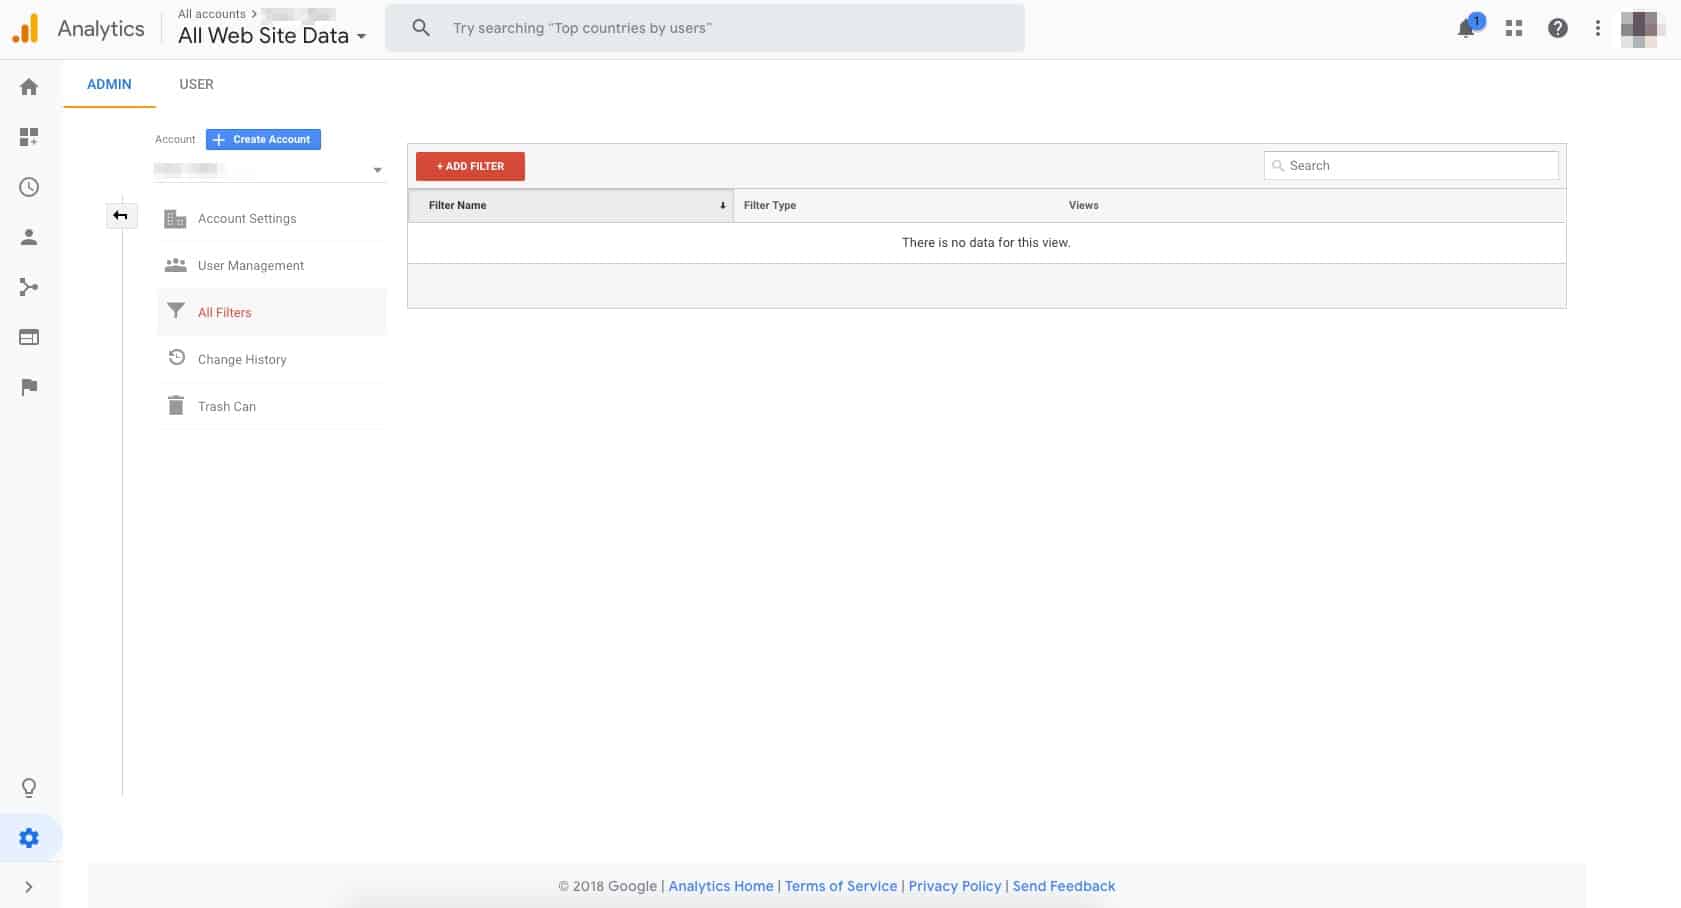 A screen capture of the Google Analytics admin portal, showing an empty filters page.